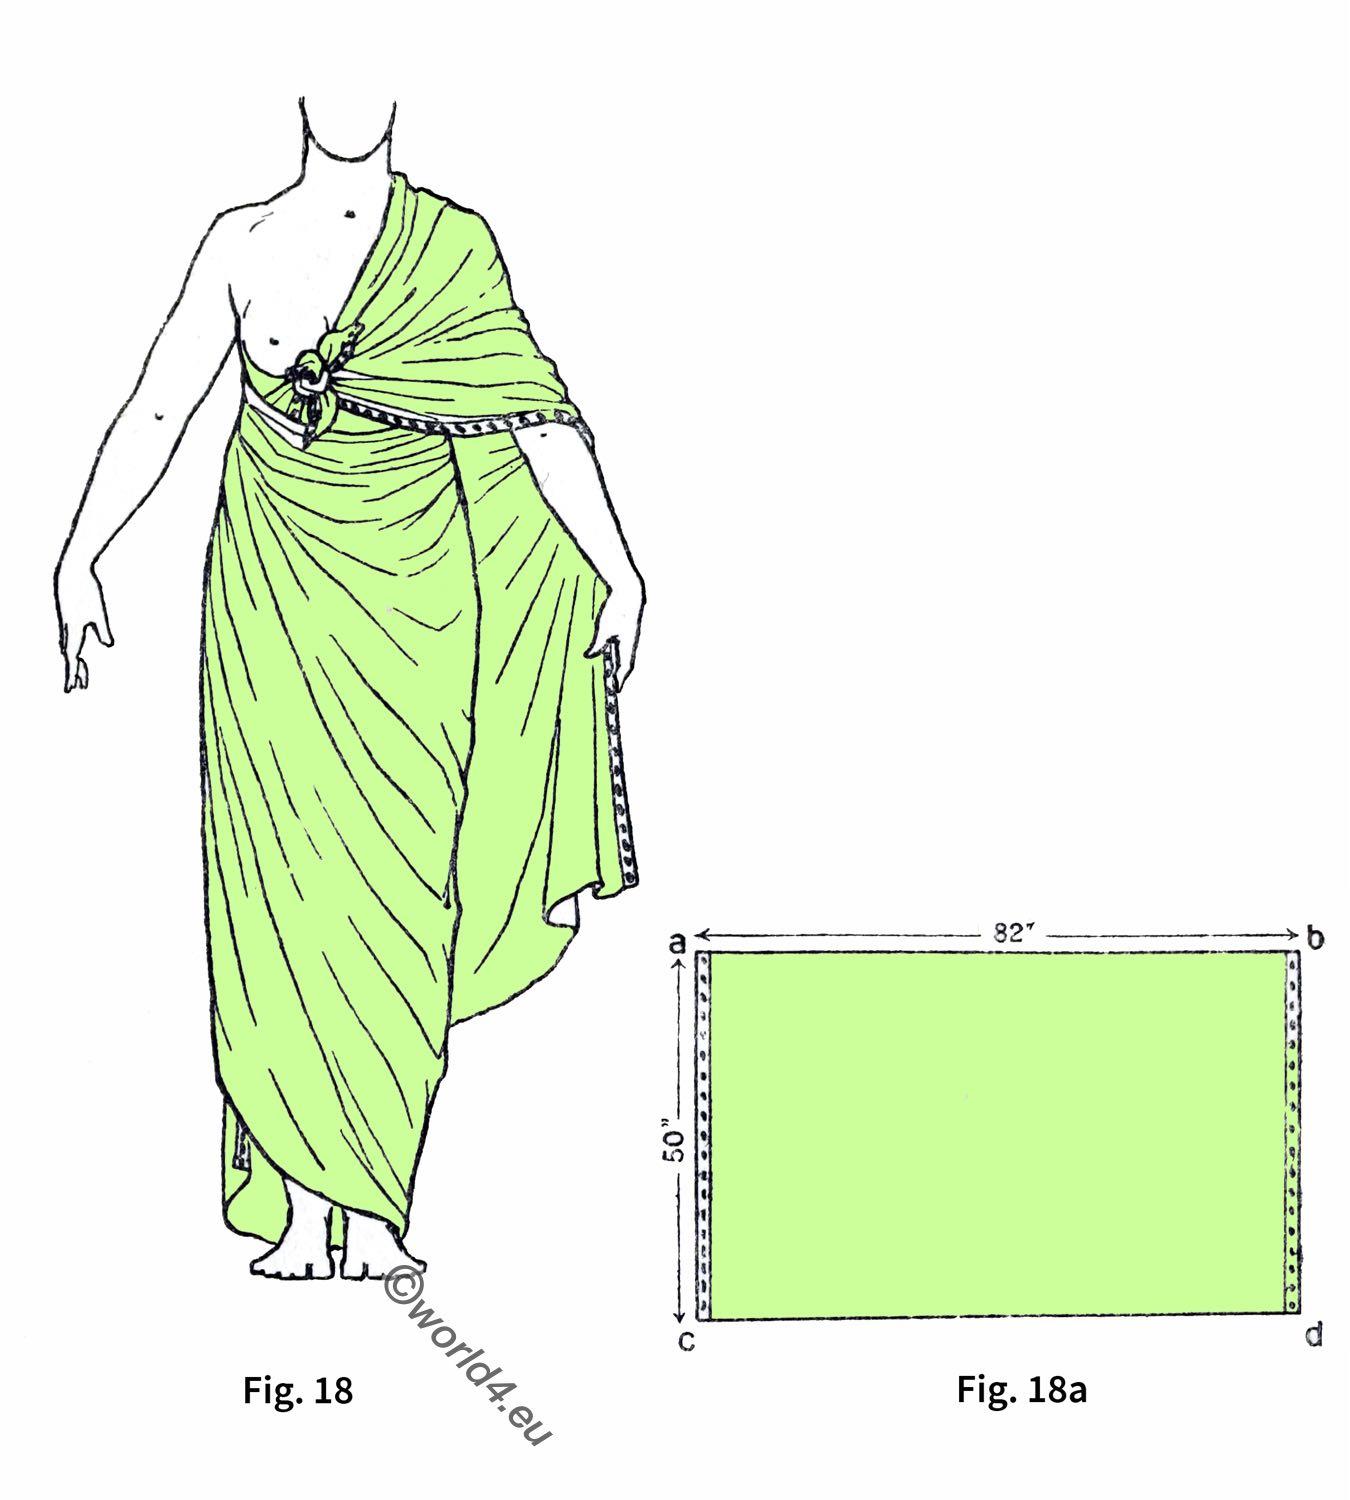 Ancient Egyptian costume and fashion history. Decoration & coloring.